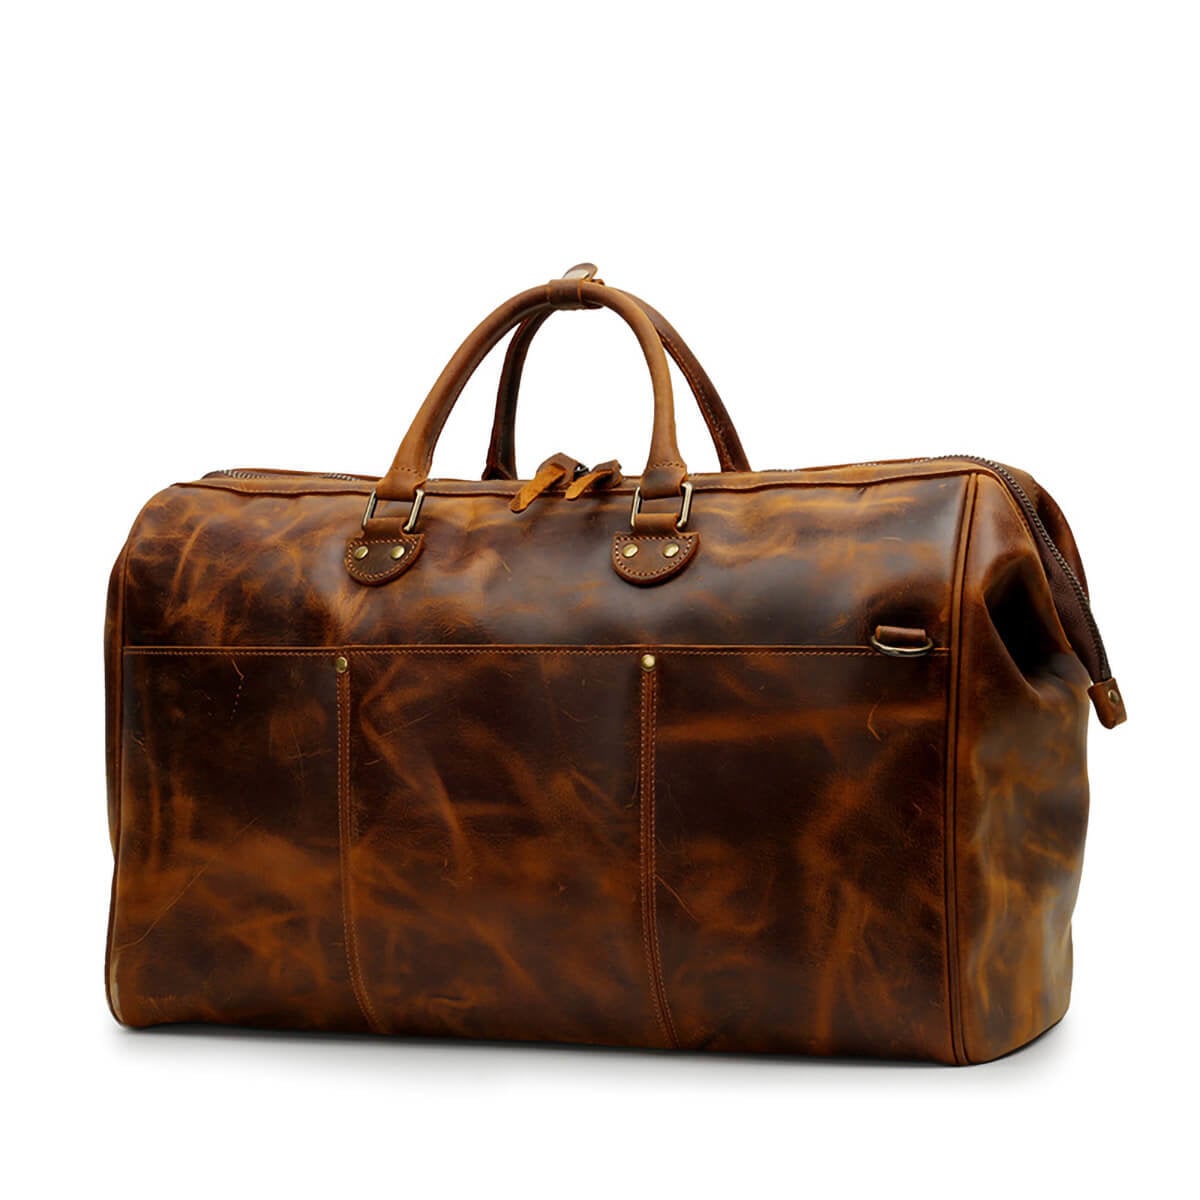 Brown leather travel duffle bag